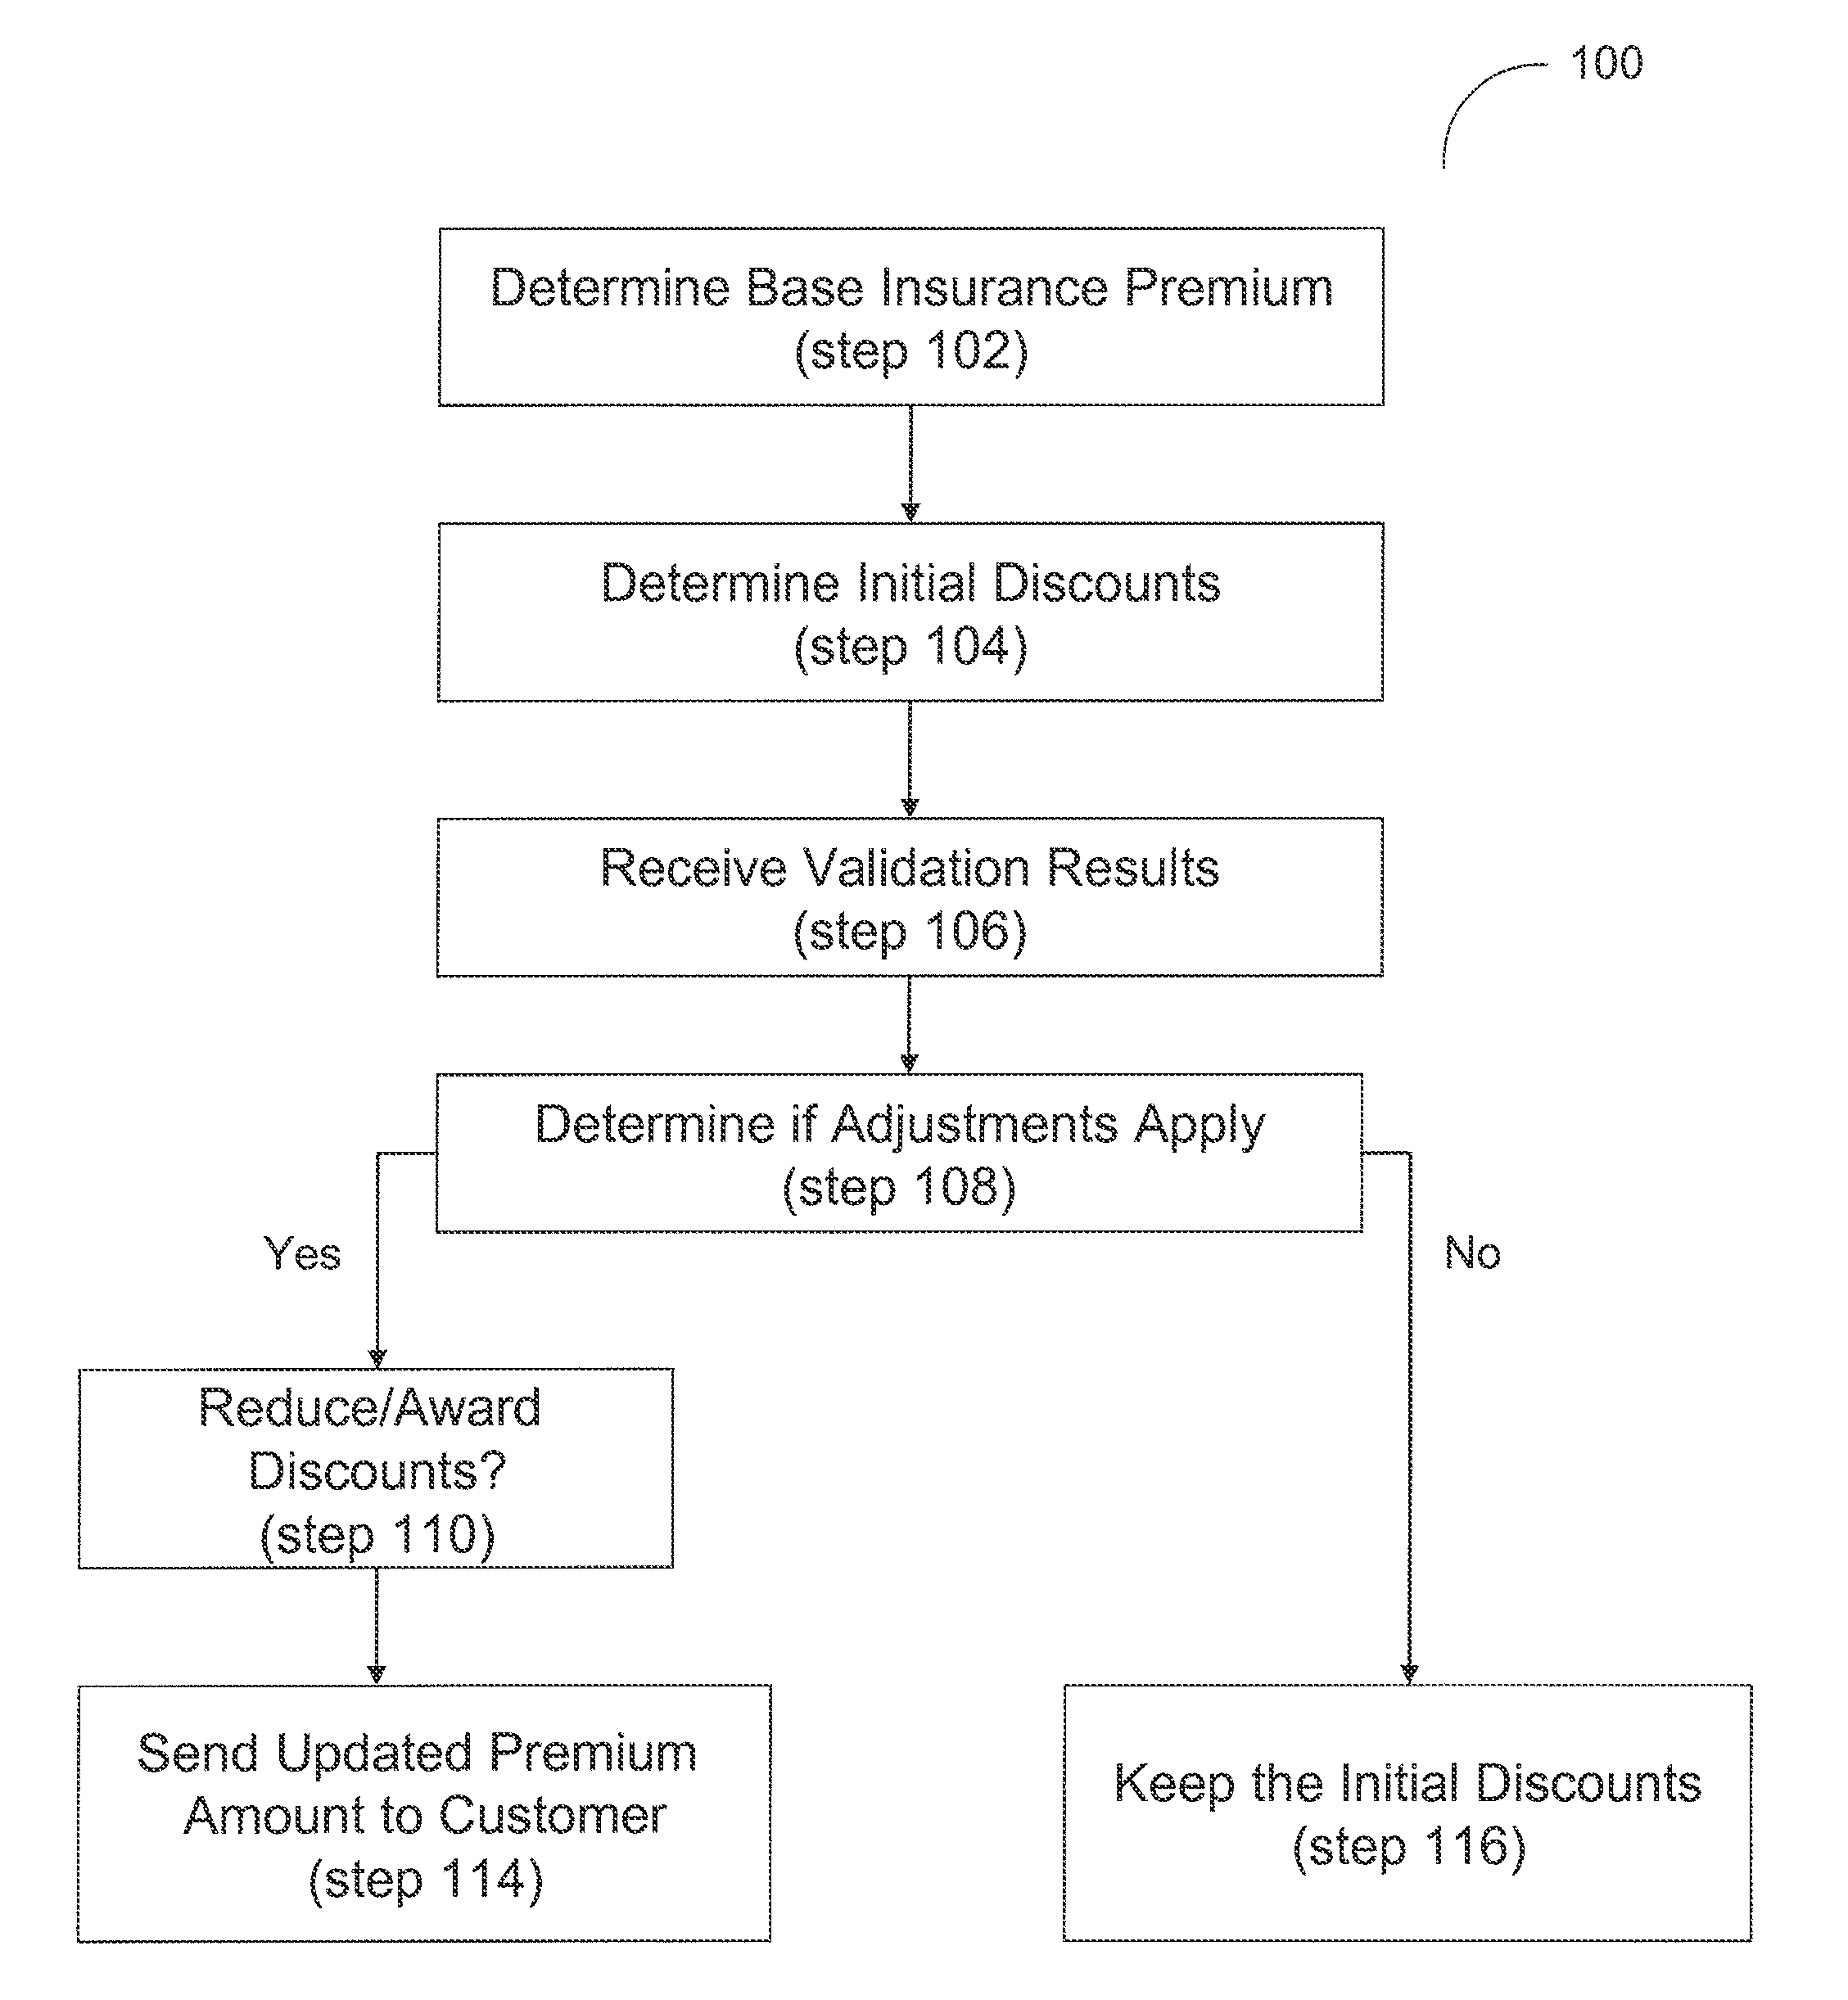 System and method for an automated validation system